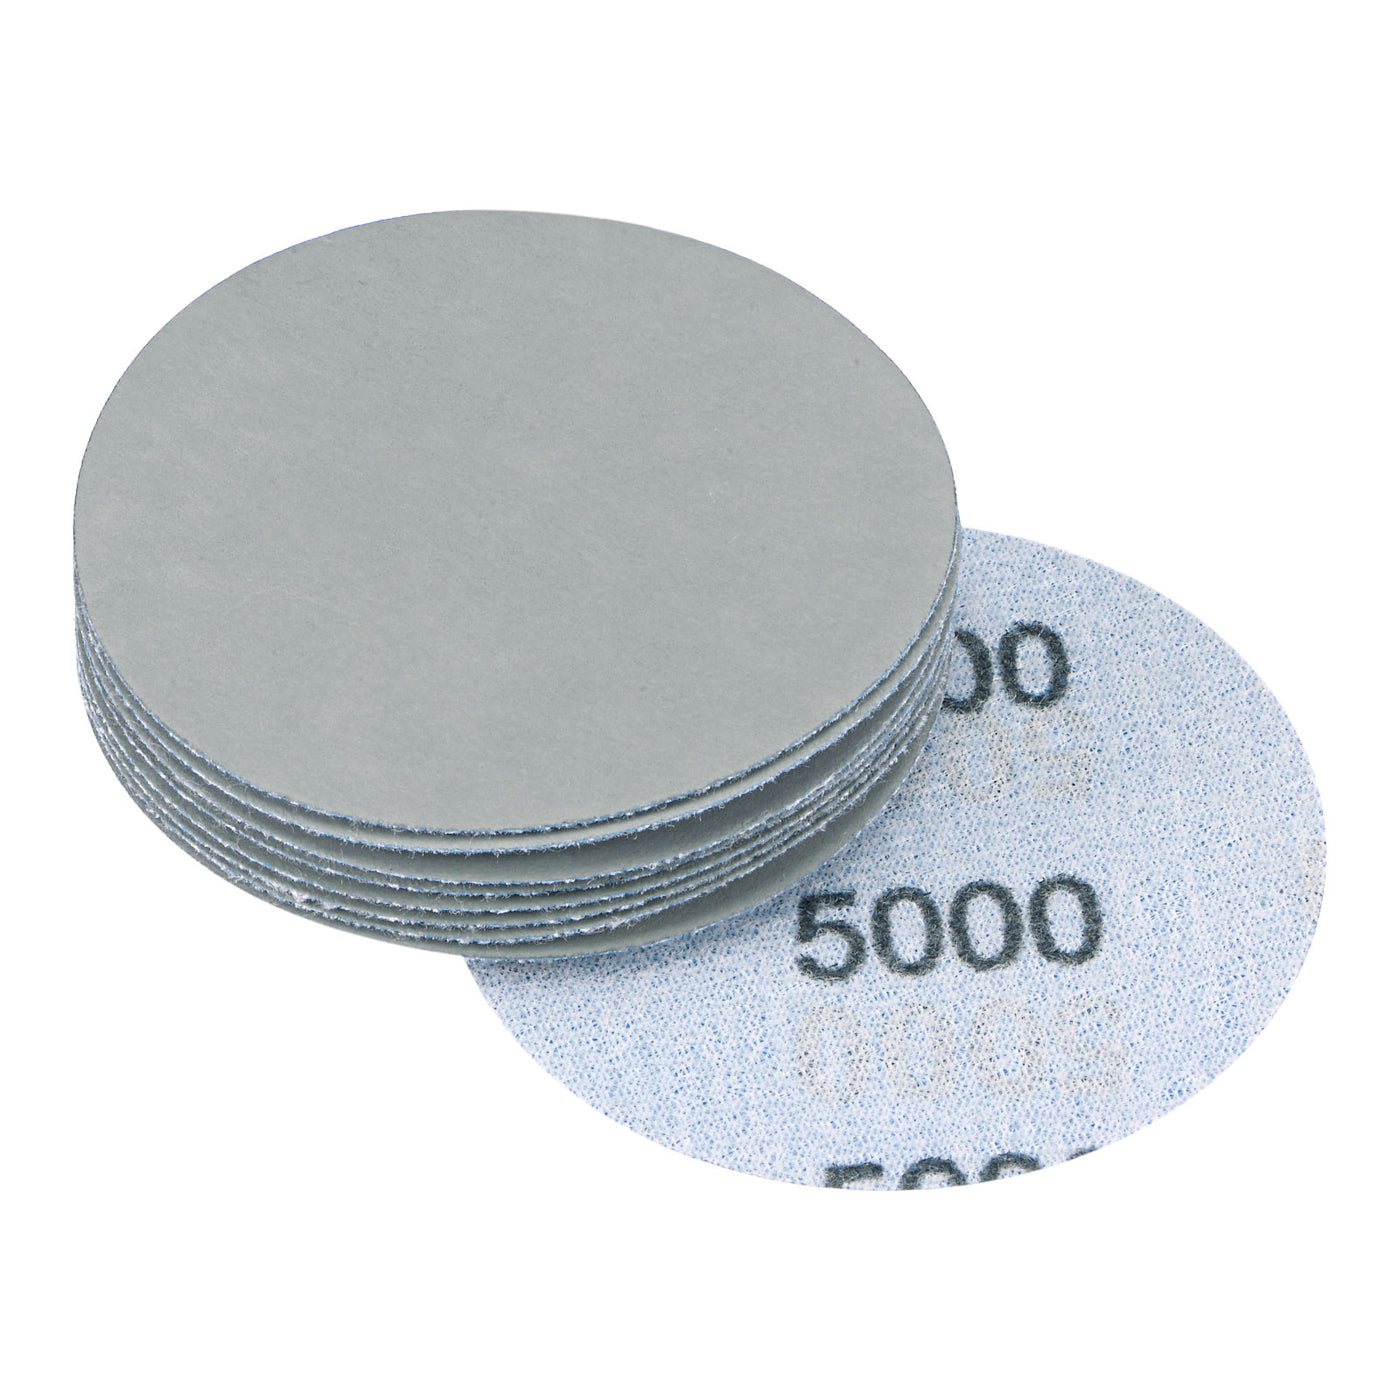 Uxcell Uxcell 3 Inch 1000 Grit Sanding Discs Wet/Dry Hook and Loop Silicon Carbide Round 10Pcs